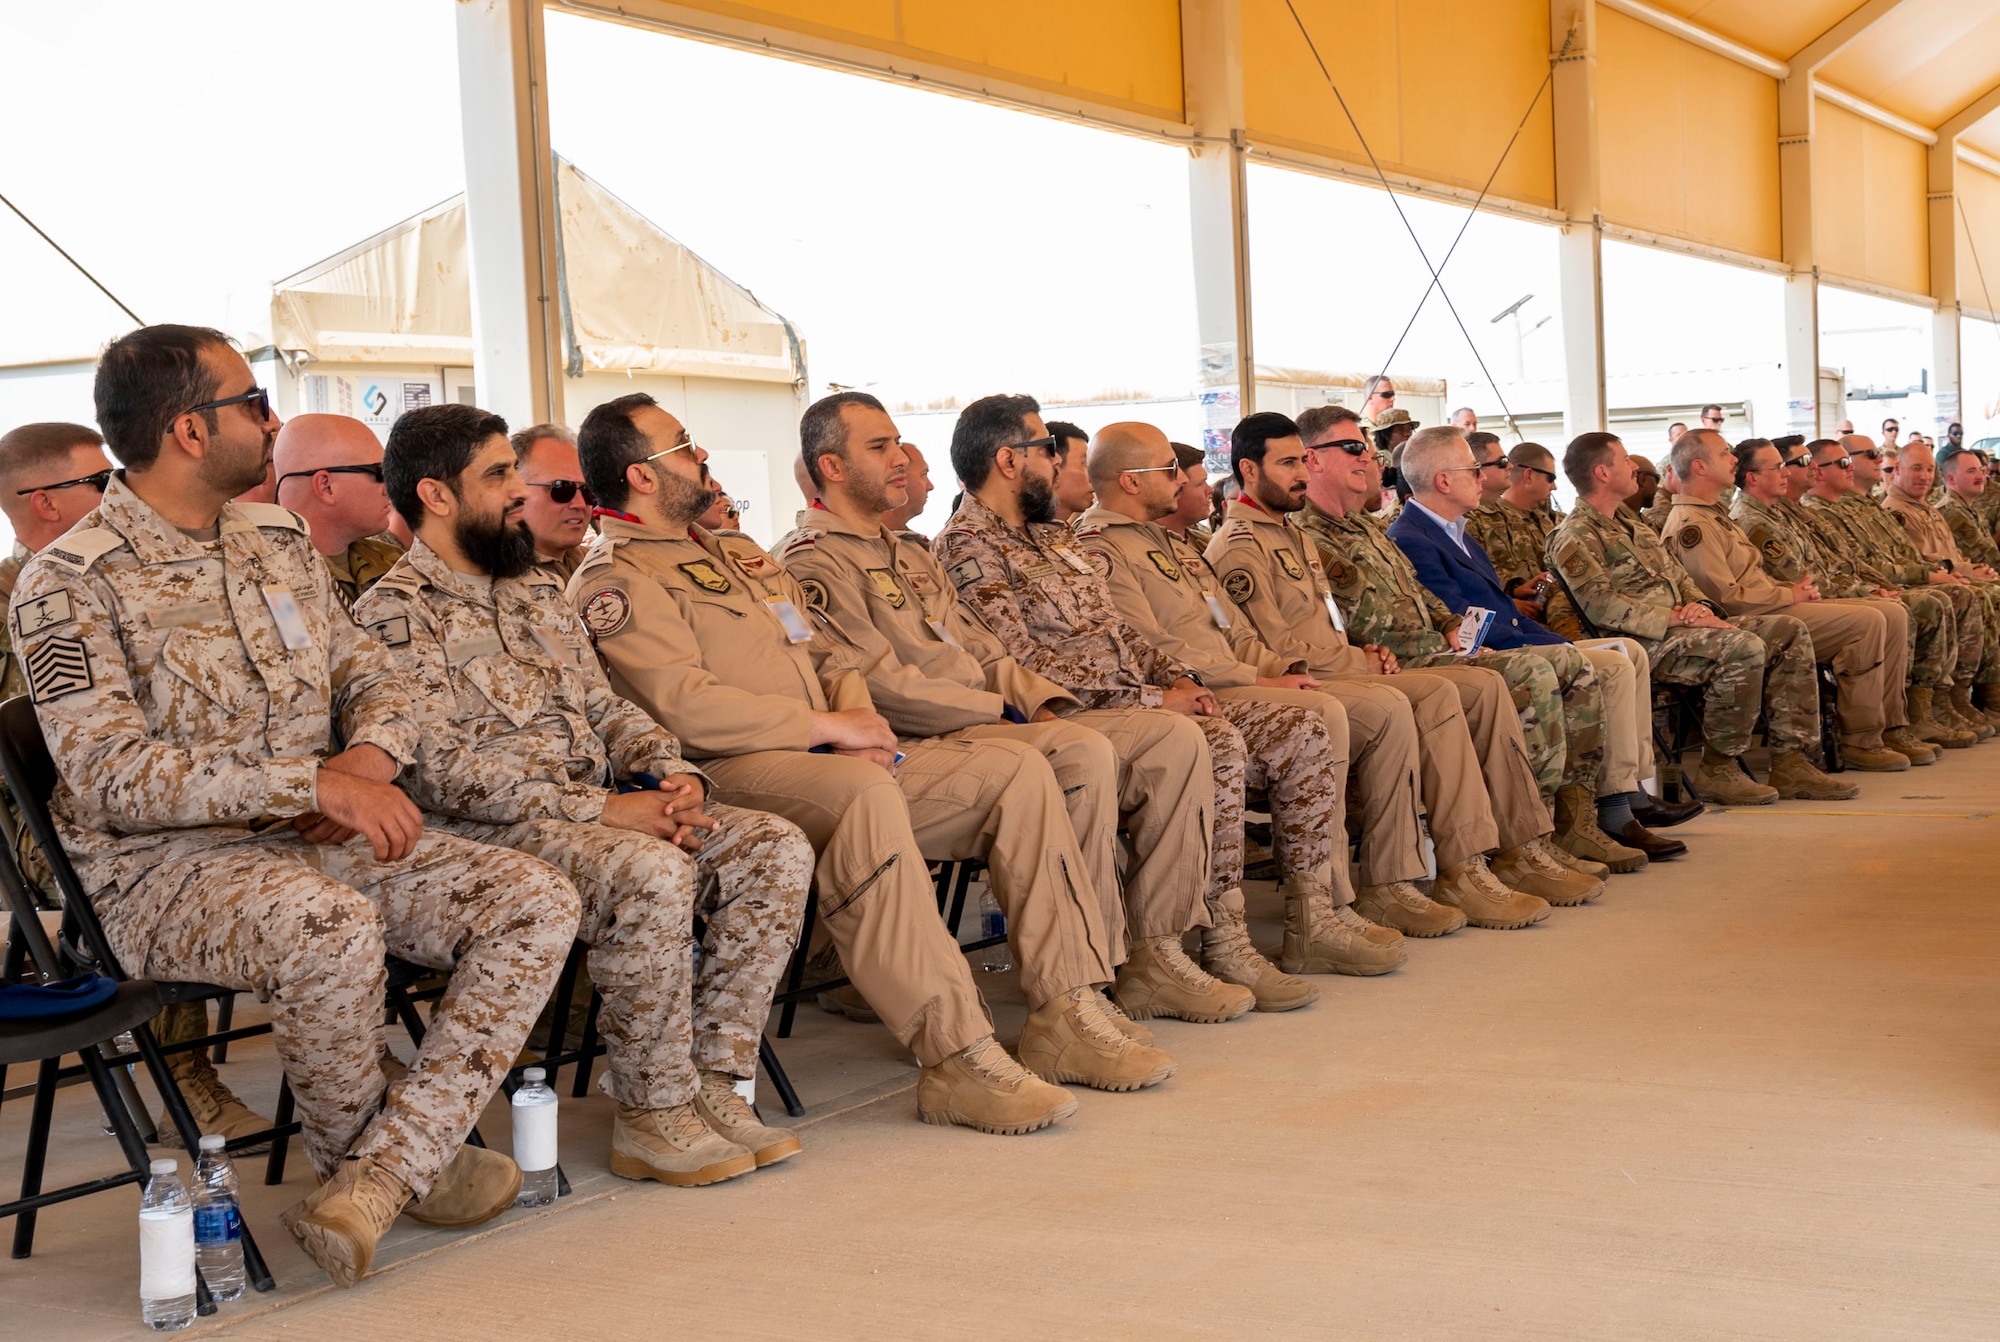 Leadership from the Royal Saudi Air Force and 378th Air Expeditionary Wing listen to a speech during a change of command ceremony at Prince Sultan Air Base, Kingdom of Saudi Arabia, May 18, 2023. During the ceremony, Brig. Gen. William Betts relinquished command of the 378th AEW to Brig. Gen. Akshai Gandhi. The tradition of change of command ceremonies are to allow service members to witness their new leader assume the responsibility and trust associated with the position of commander. (U.S. Air Force photo by Senior Airman Stephani Barge)